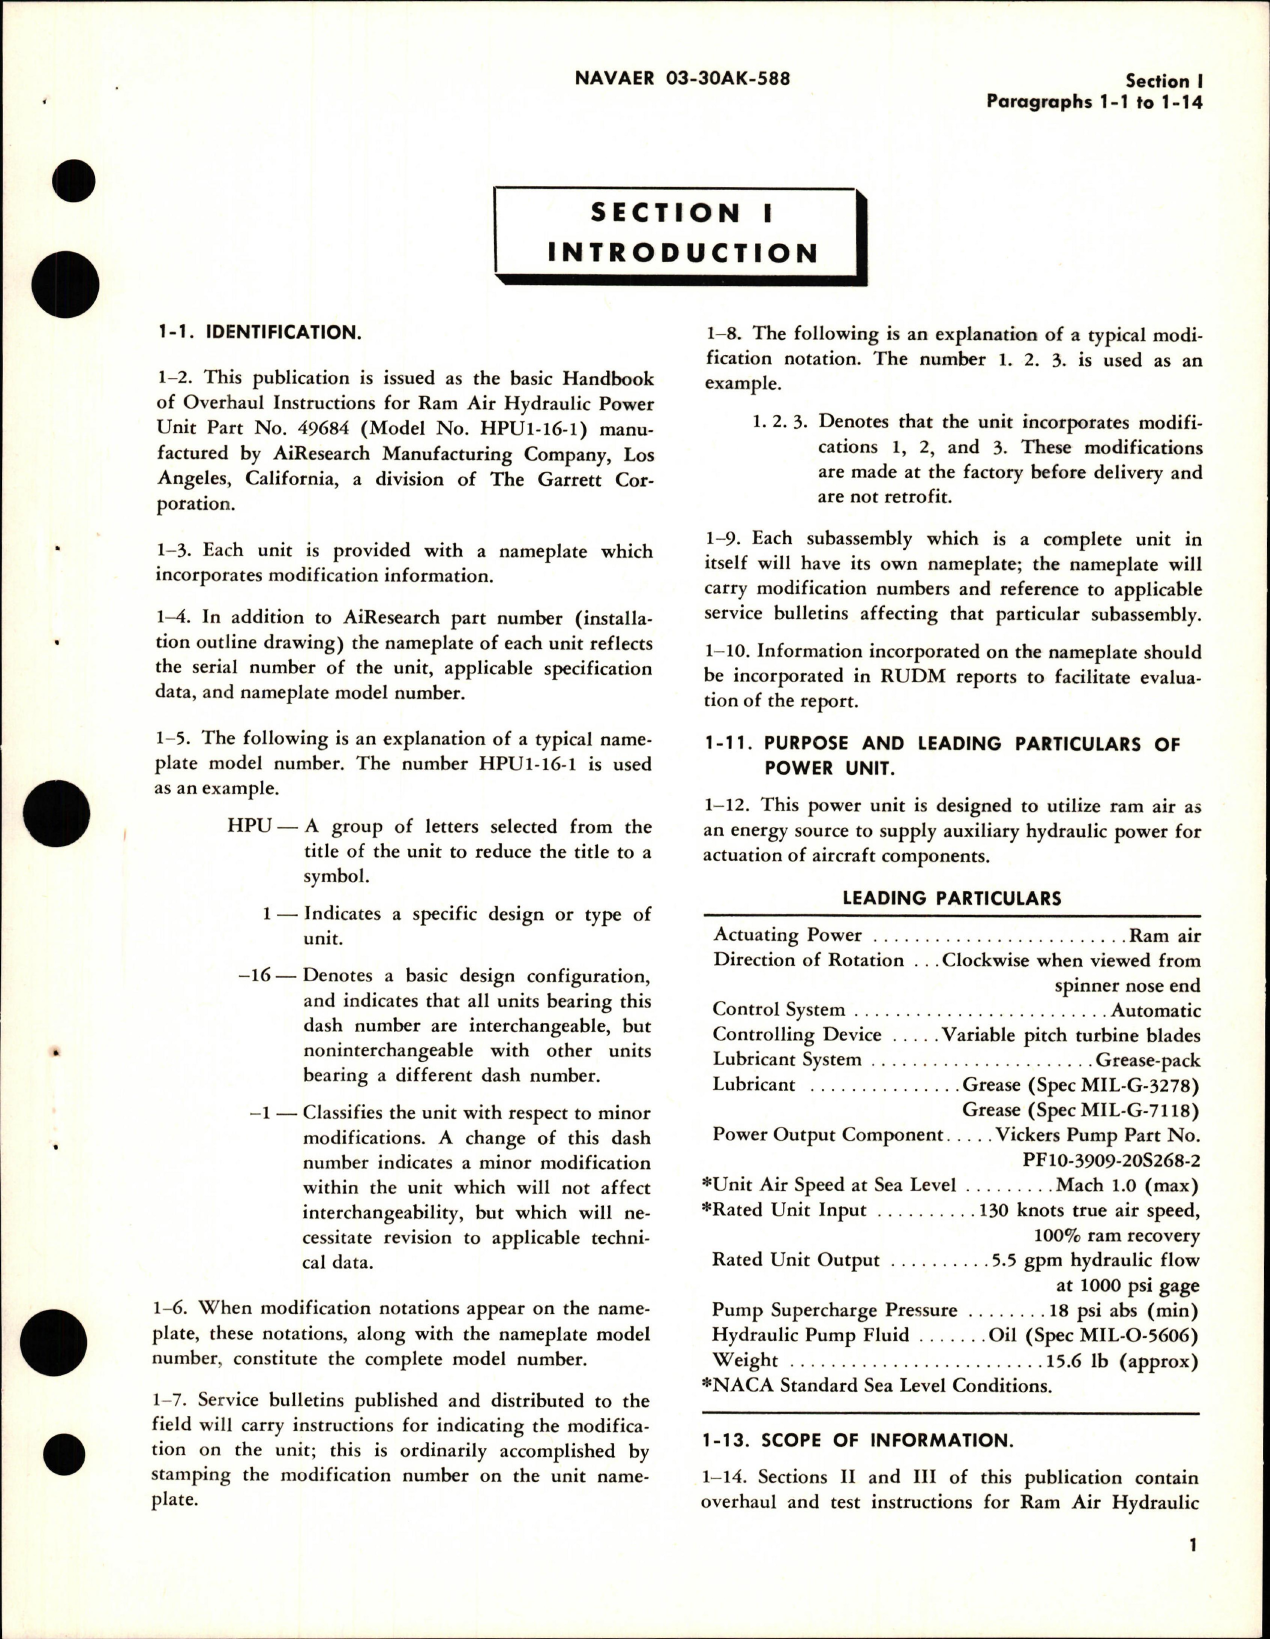 Sample page 5 from AirCorps Library document: Overhaul Instructions for Ram Air Hydraulic Power Unit - Part 49684 - Model HPU1-16 